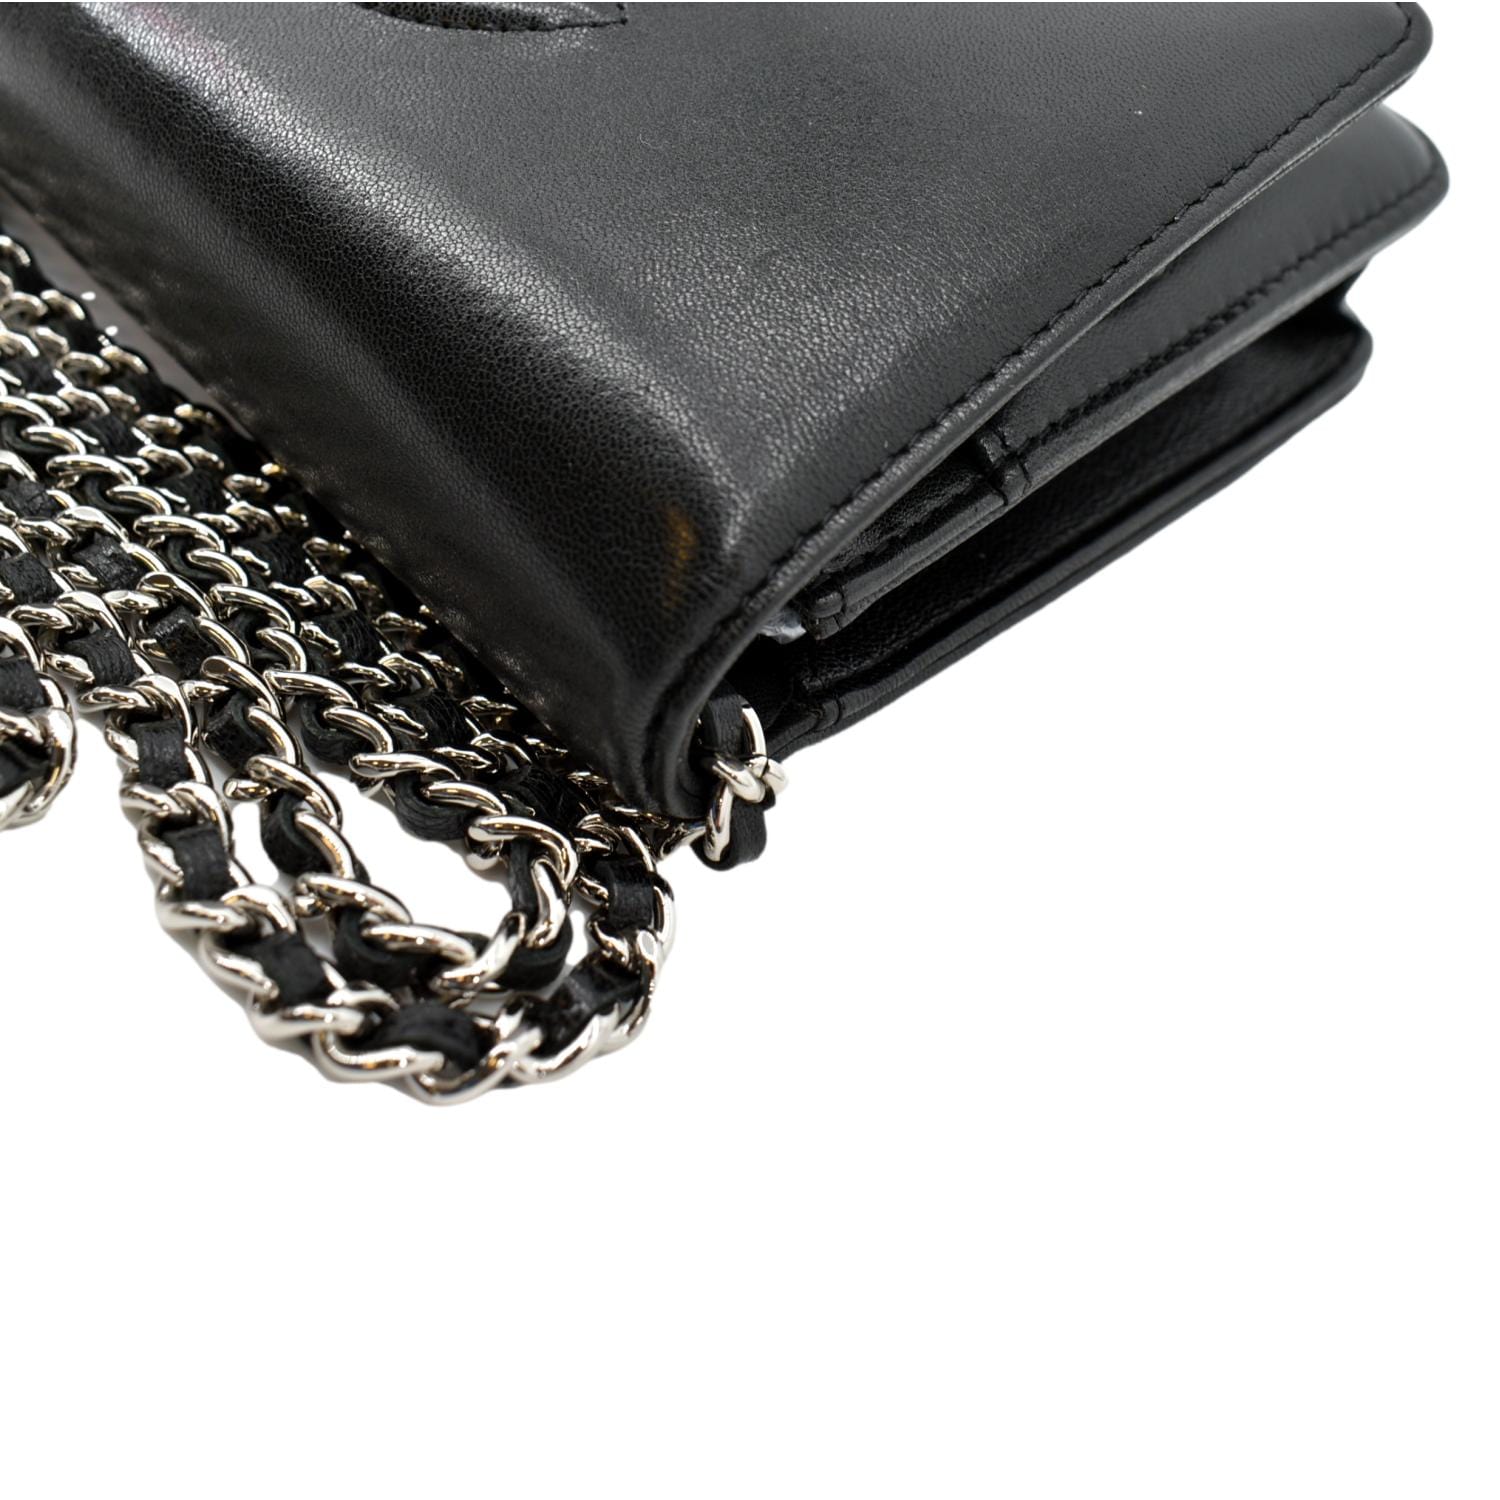 Chanel Wallet On Chain Timeless/Classique patent leather crossbody